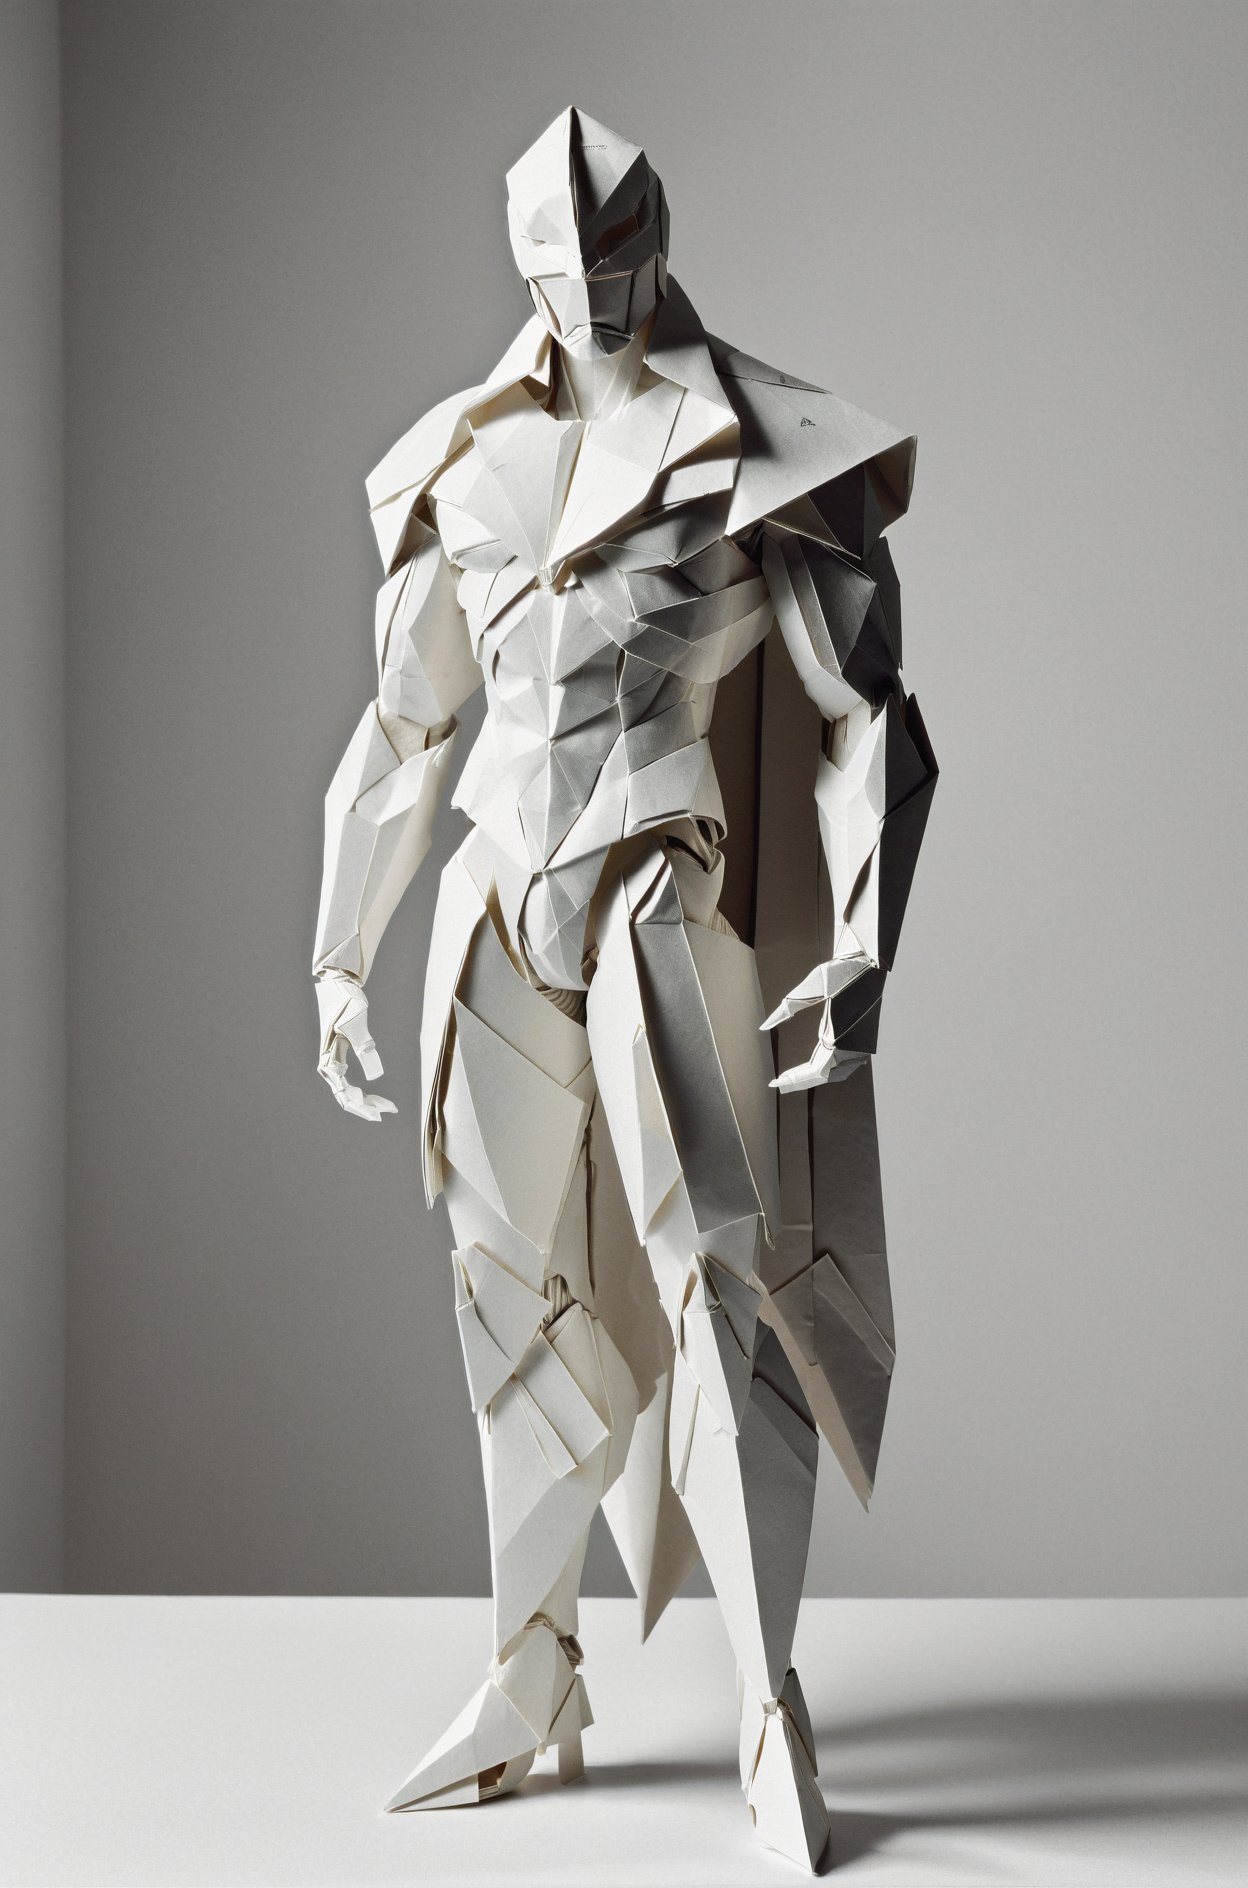 film grain texture,analog photography aesthetic,A monochromatic origami model of a humanoid figure, posed standing with its left arm extended, intricate folds mimic muscular definition and clothing drapery, contrast between sharp, angular creases and smoother planes suggests armored attire, grayscale hues with subtle shading enhancing the three-dimensional form, clean white background accentuates the figure's dark tones, minimalist composition focuses entirely on the paper sculpture's details, embodying both fragility and strength, evokes the aesthetic of modern, stylized superheroes or futuristic warriors.,